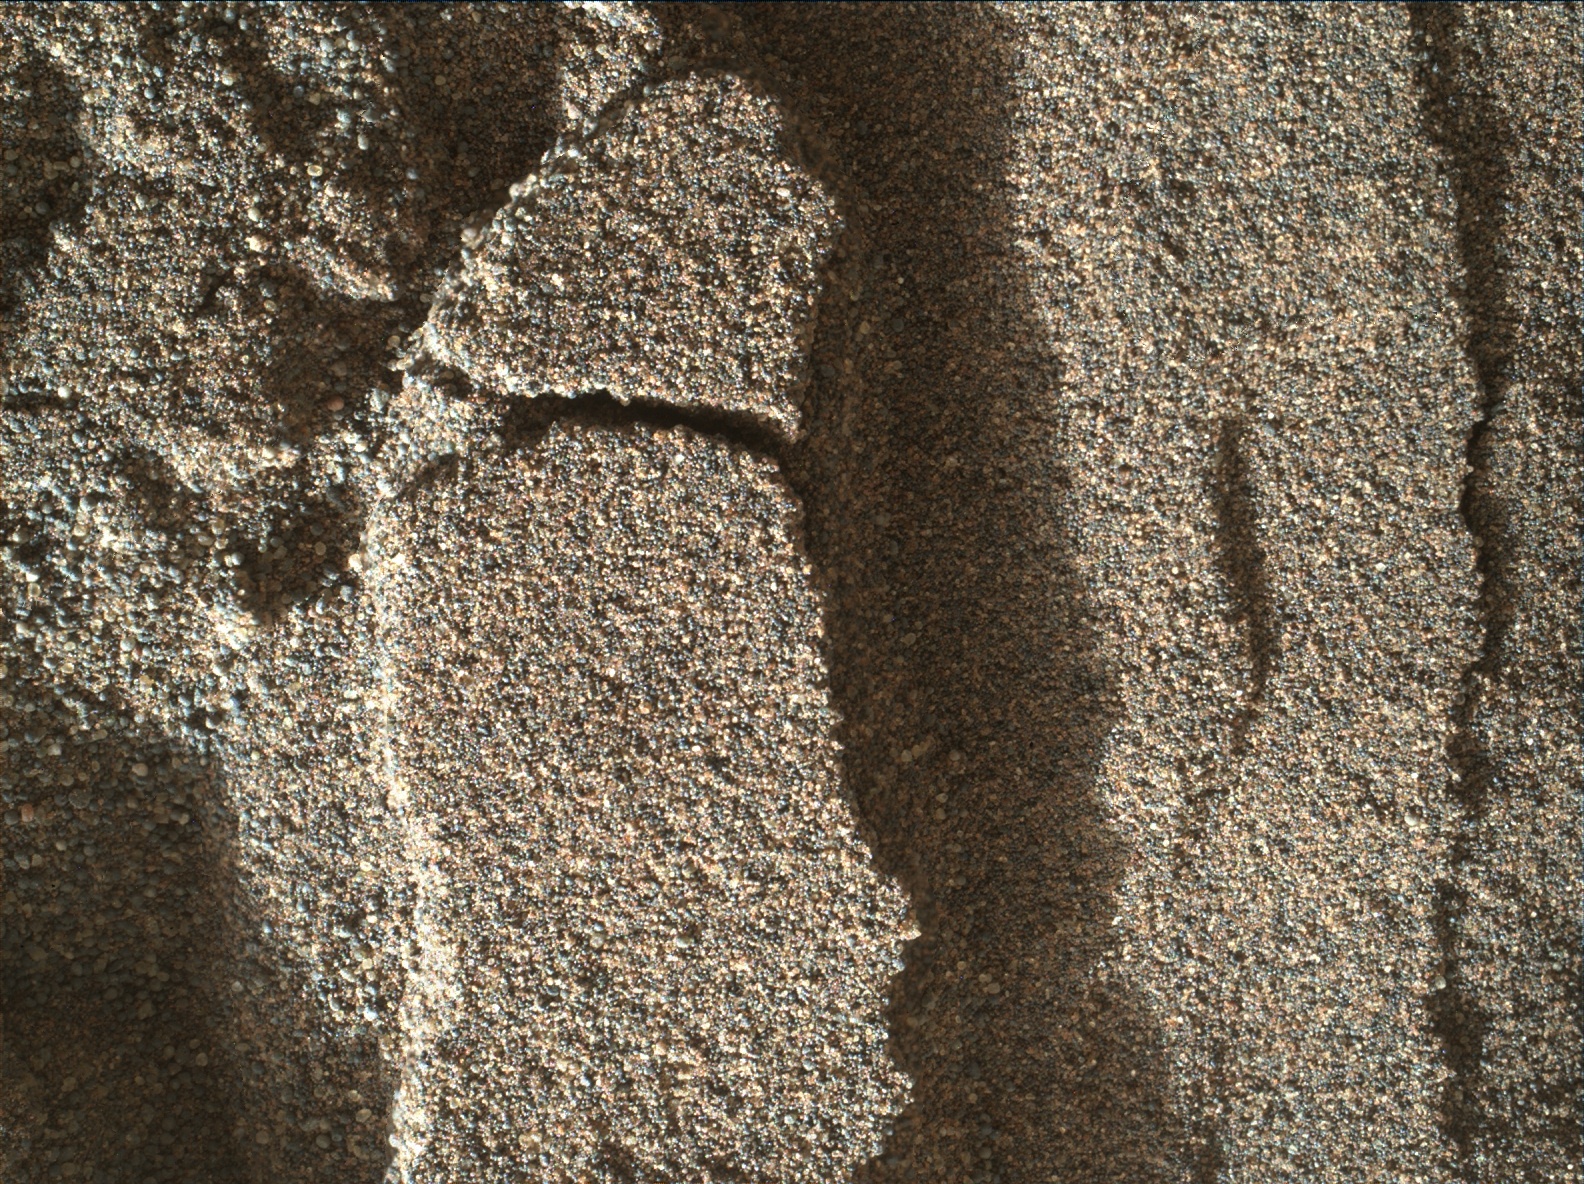 Nasa's Mars rover Curiosity acquired this image using its Mars Hand Lens Imager (MAHLI) on Sol 1182